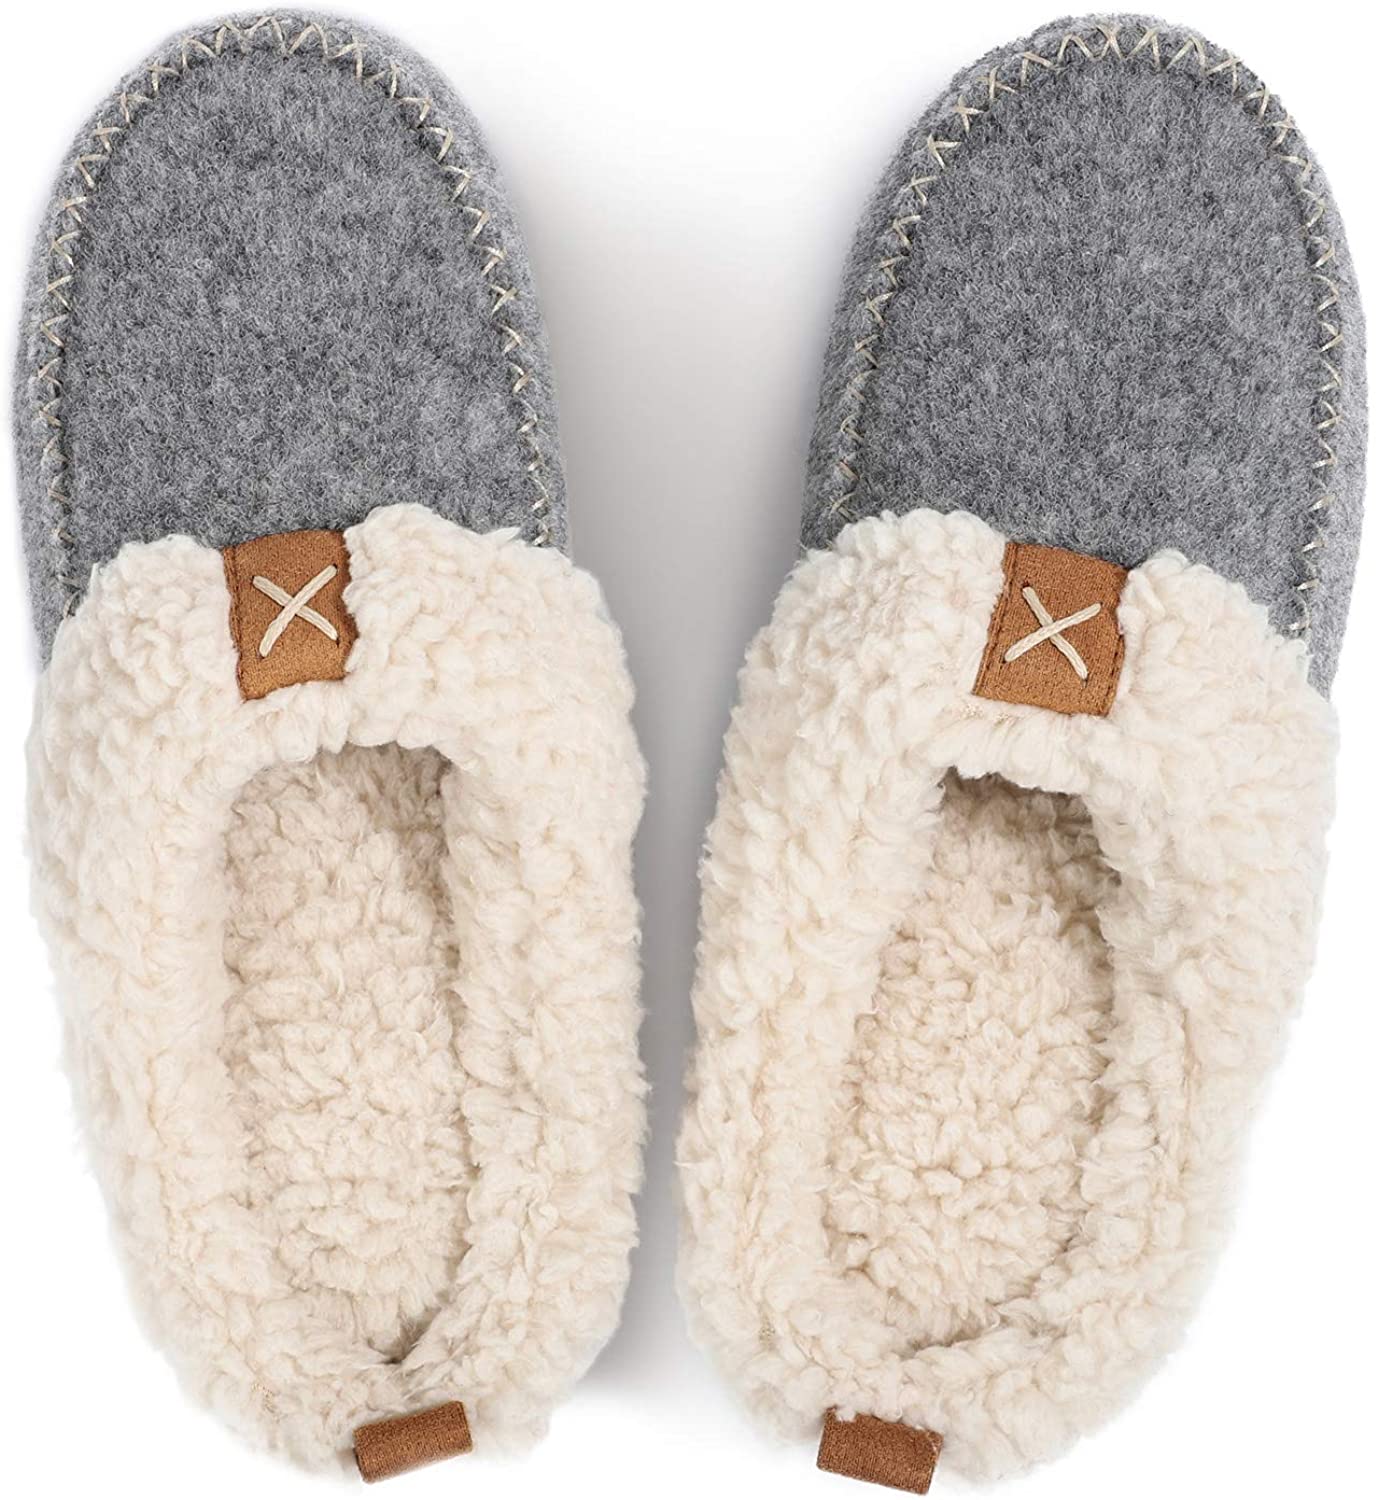 LongBay Ladies Moccasin Slippers Suedette with Warm Plush Lined Memory Foam Women House Slipper Boots